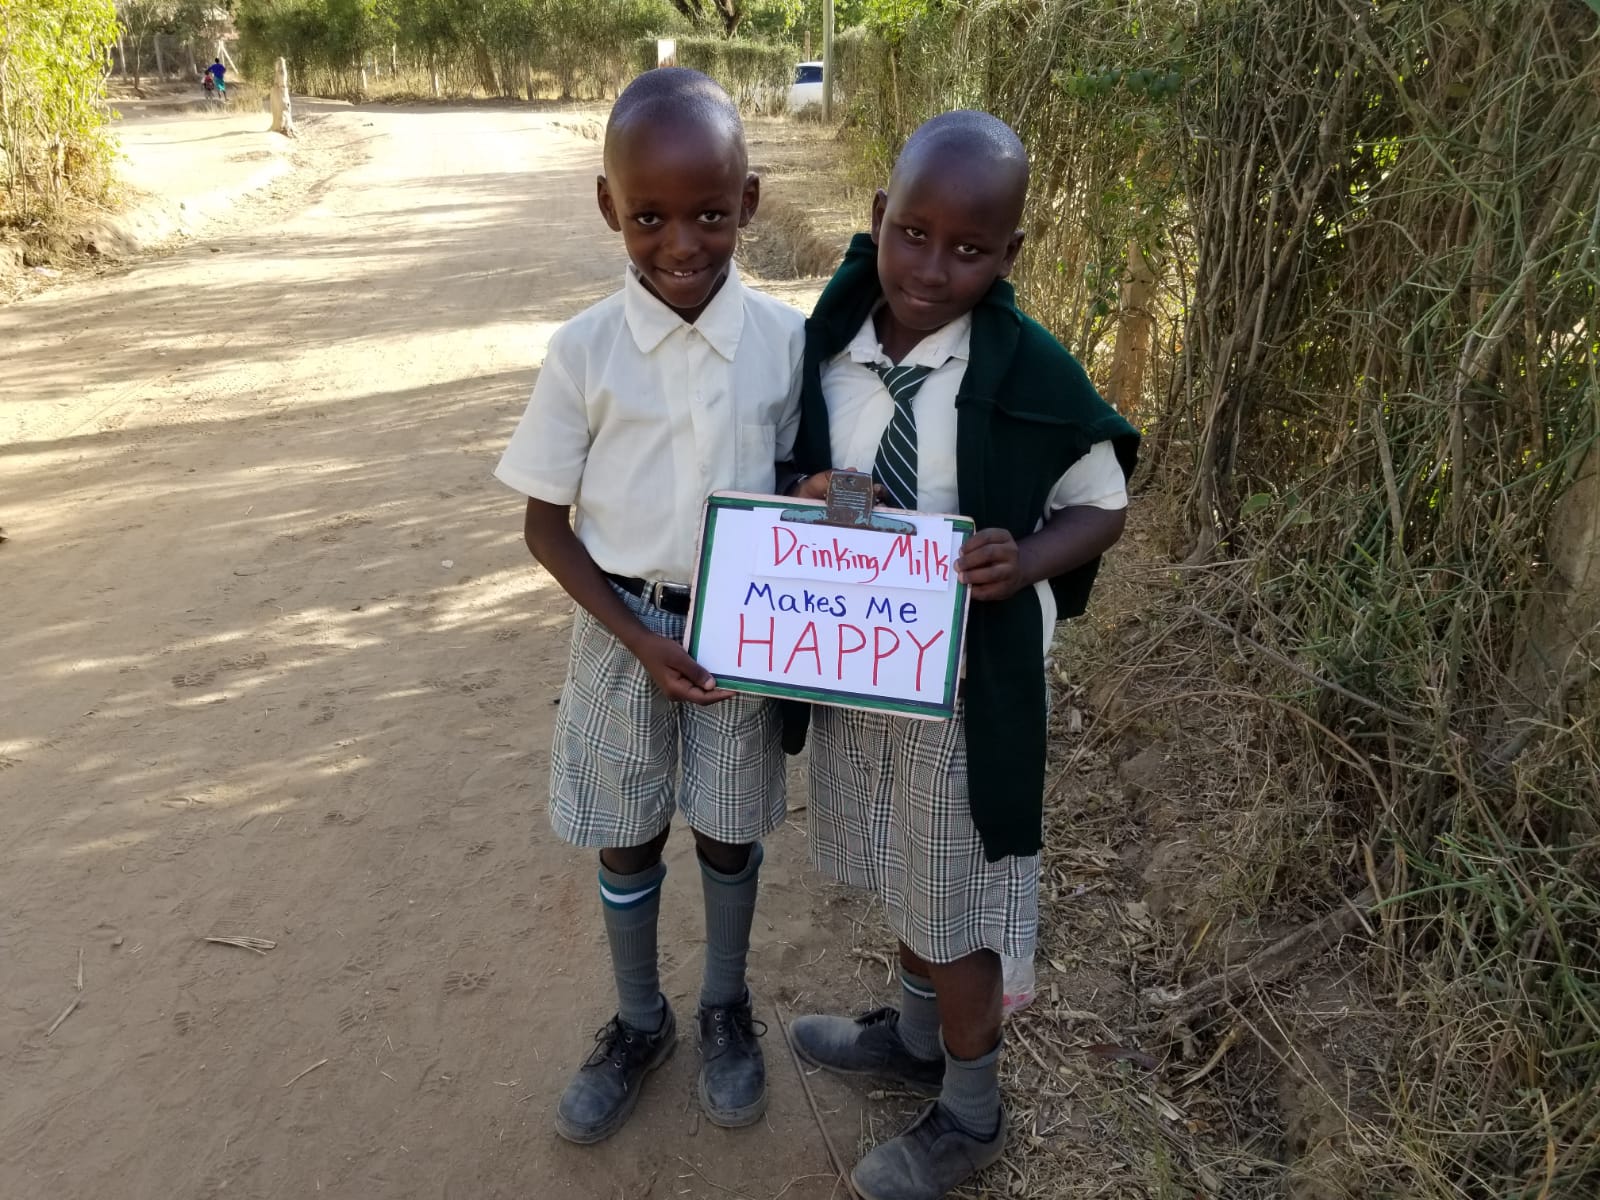 Drinking milk makes these boys happy according to their sign